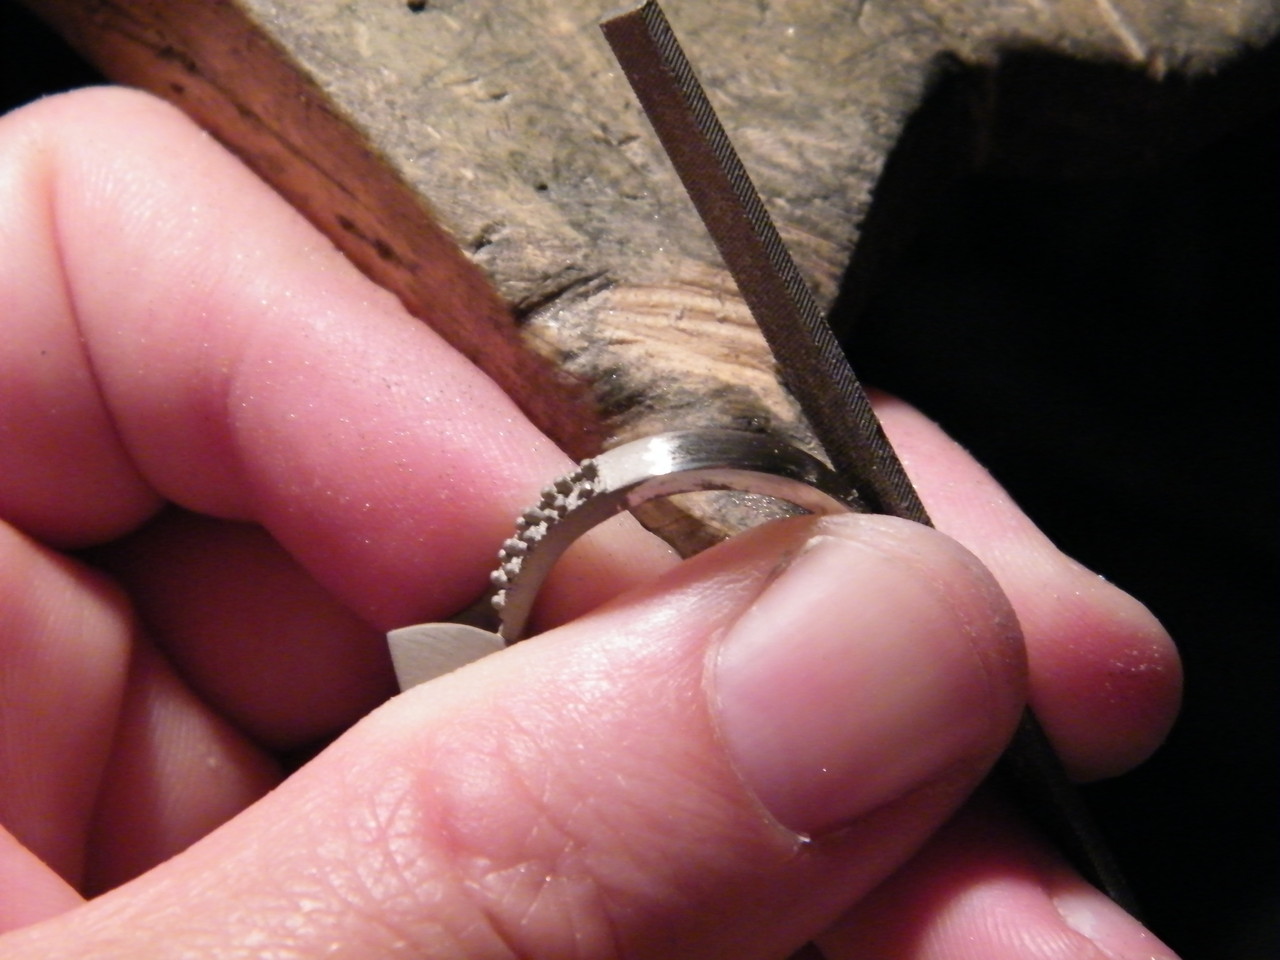 Finishing the piece is the next stage.  Many hours of work still lie ahead in the hand-finishing process.